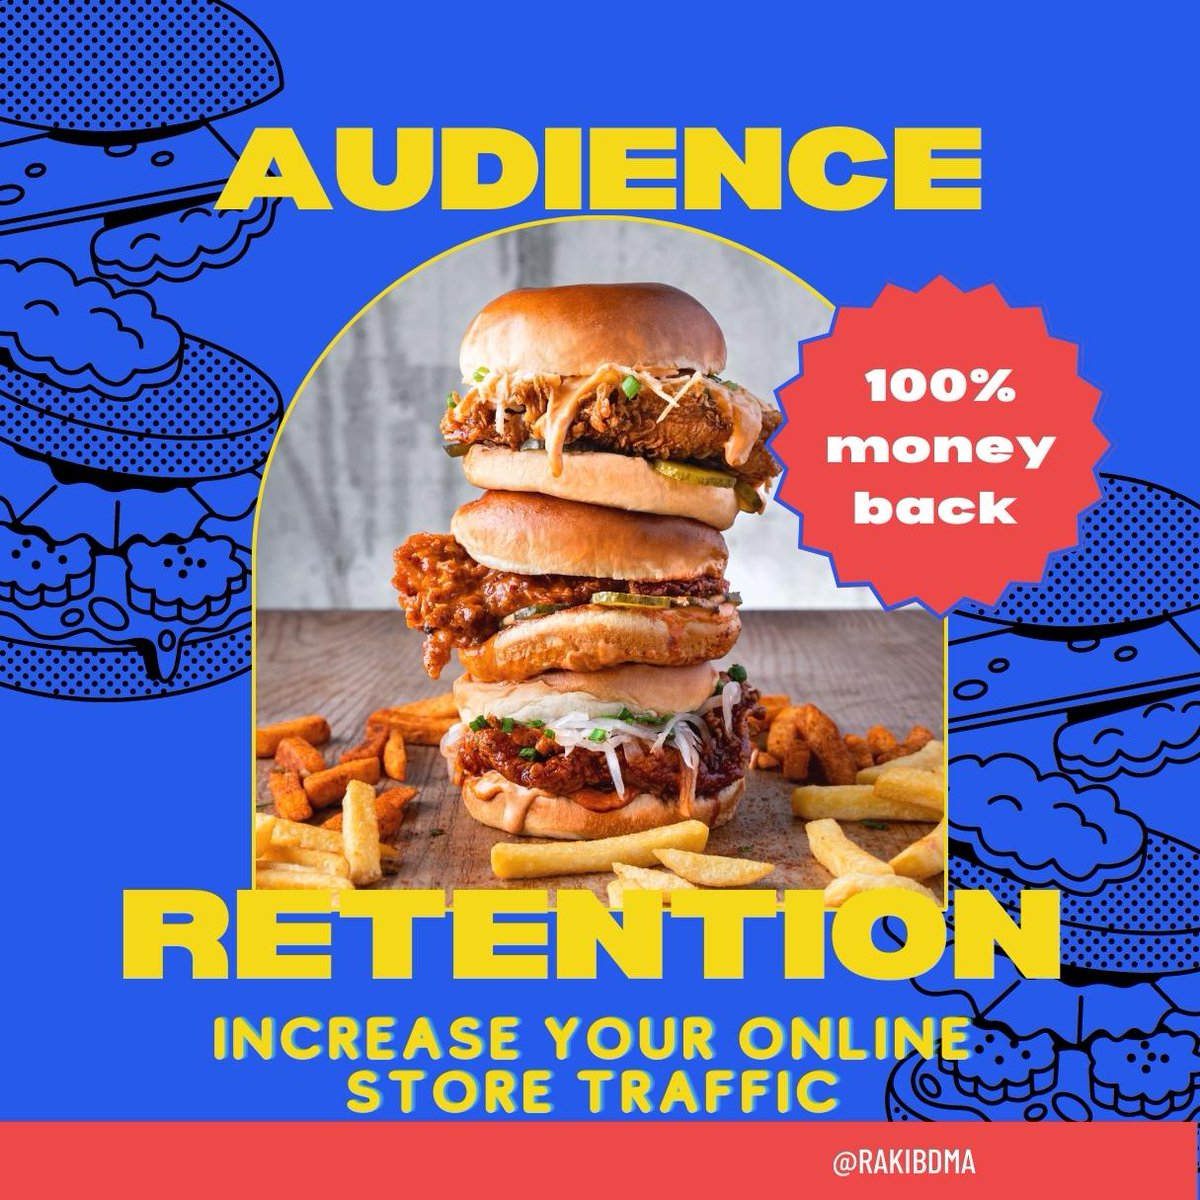 'Attention is precious, retention is priceless. Discover the key to building a loyal audience and taking your social media presence to the next level! #AudienceRetention #SocialMediaSuccess #EngageAndGrow'